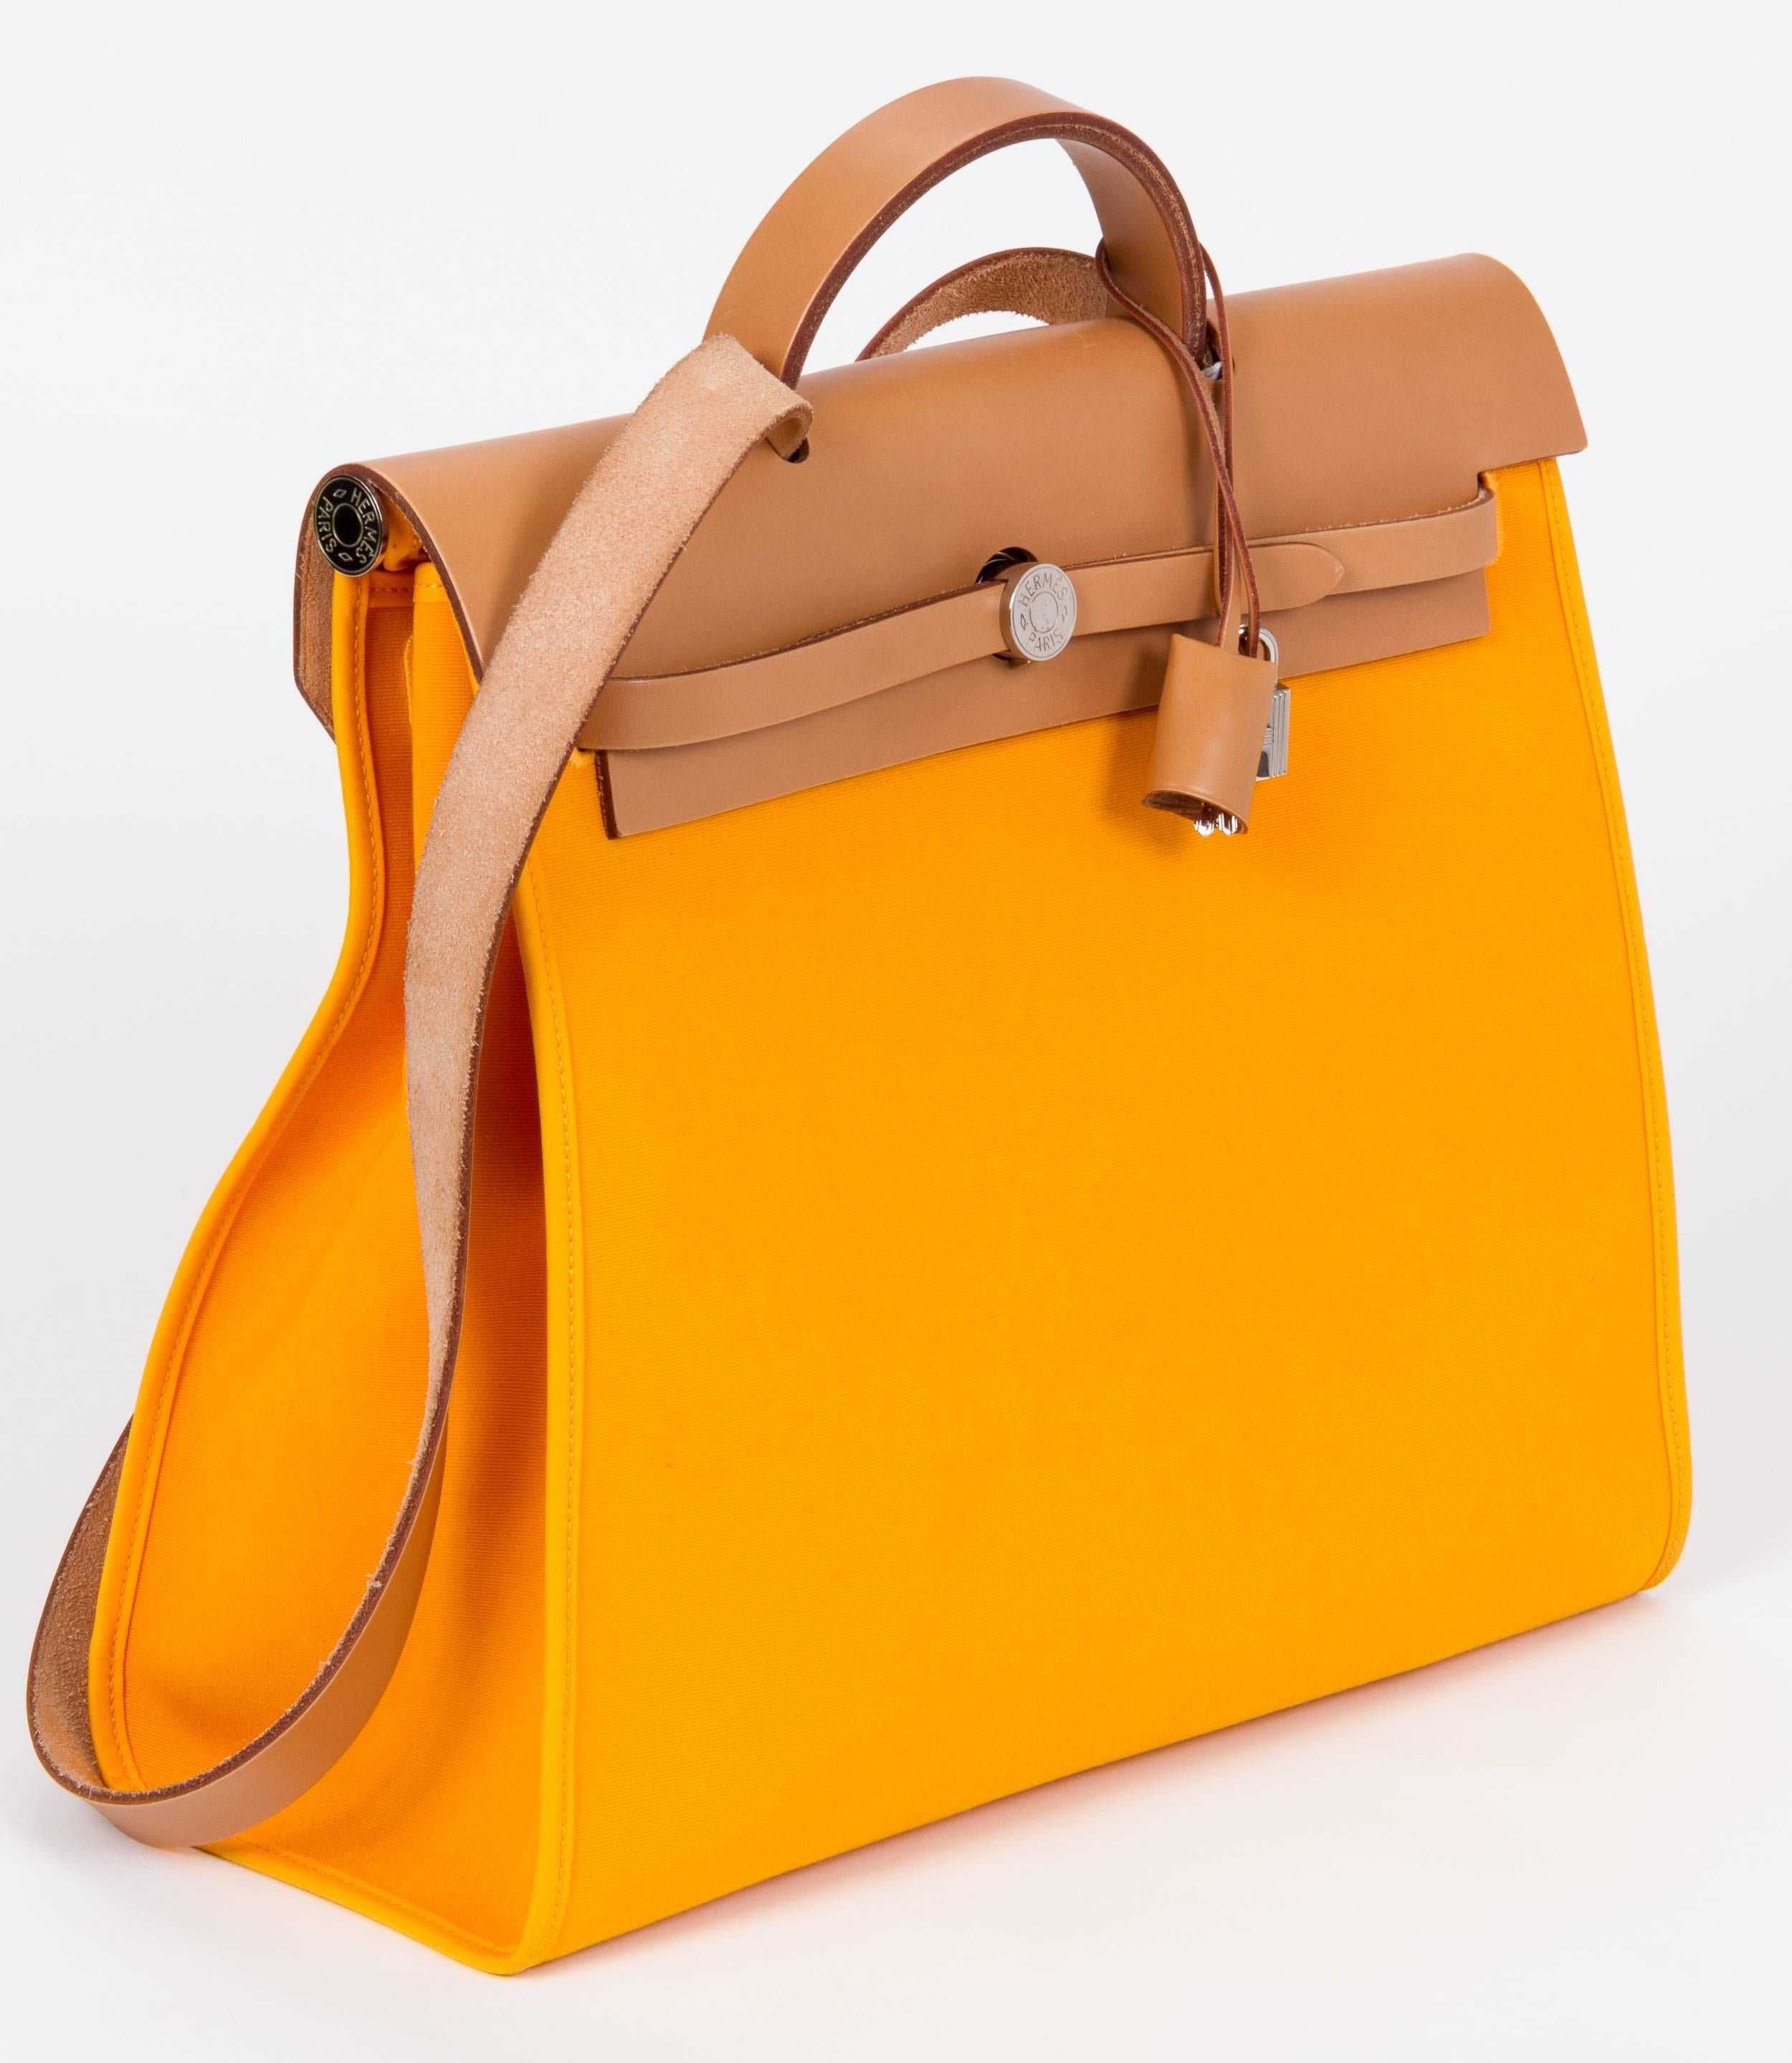 Hermes herbag in large size. Yellow exterior canvas and orange interior with natural cowhide leather strap and top. Shoulder drop 18